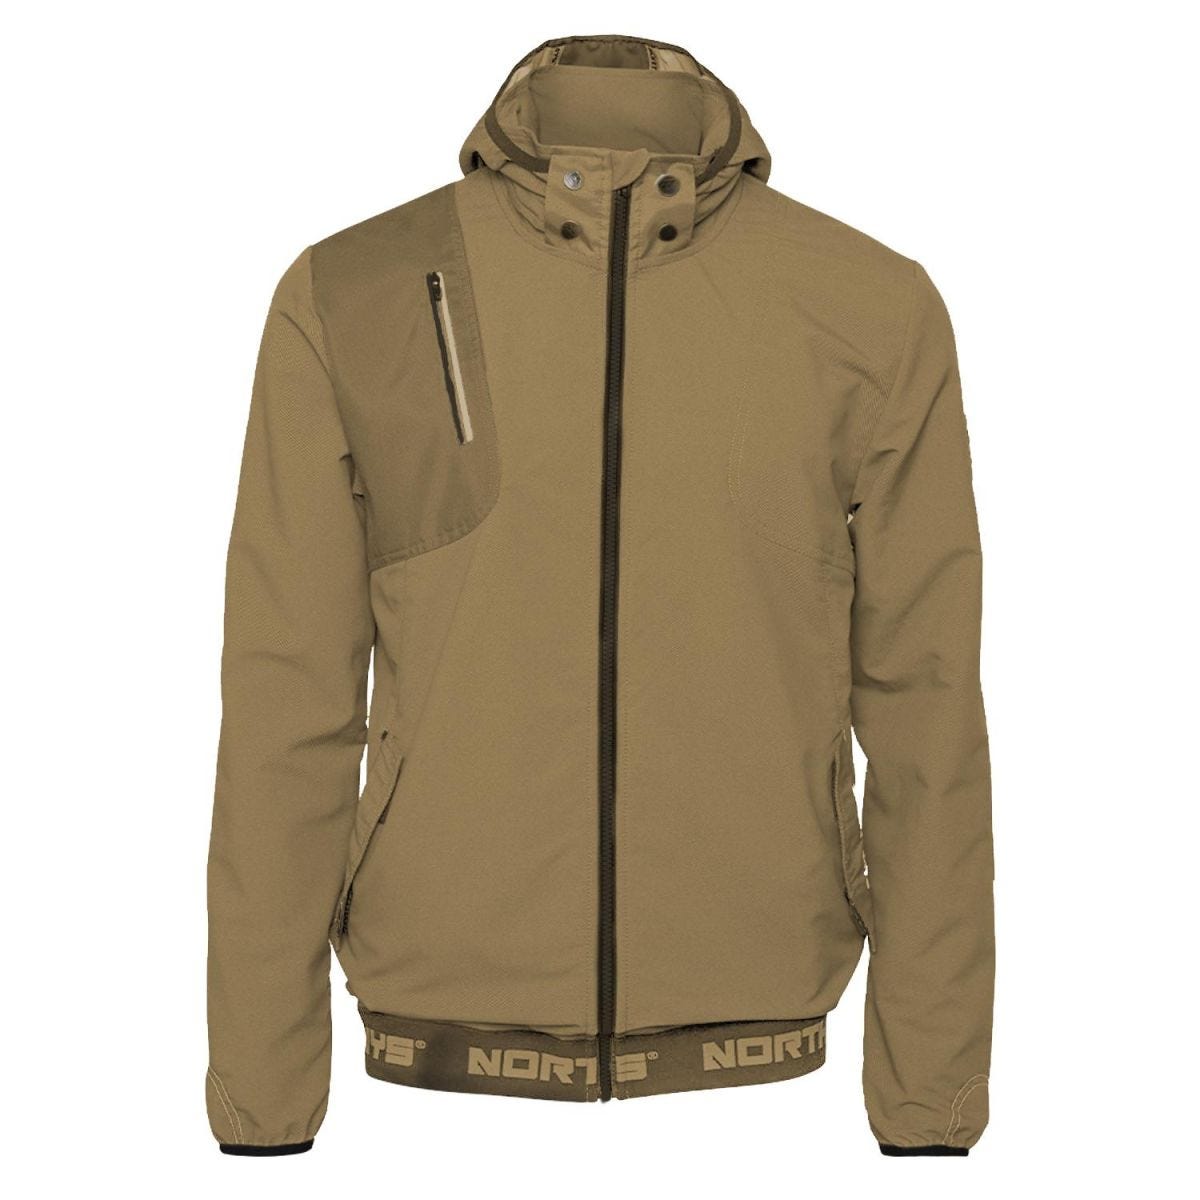 Blouson de travail multipoches Irons beige - North Ways - Taille M 1